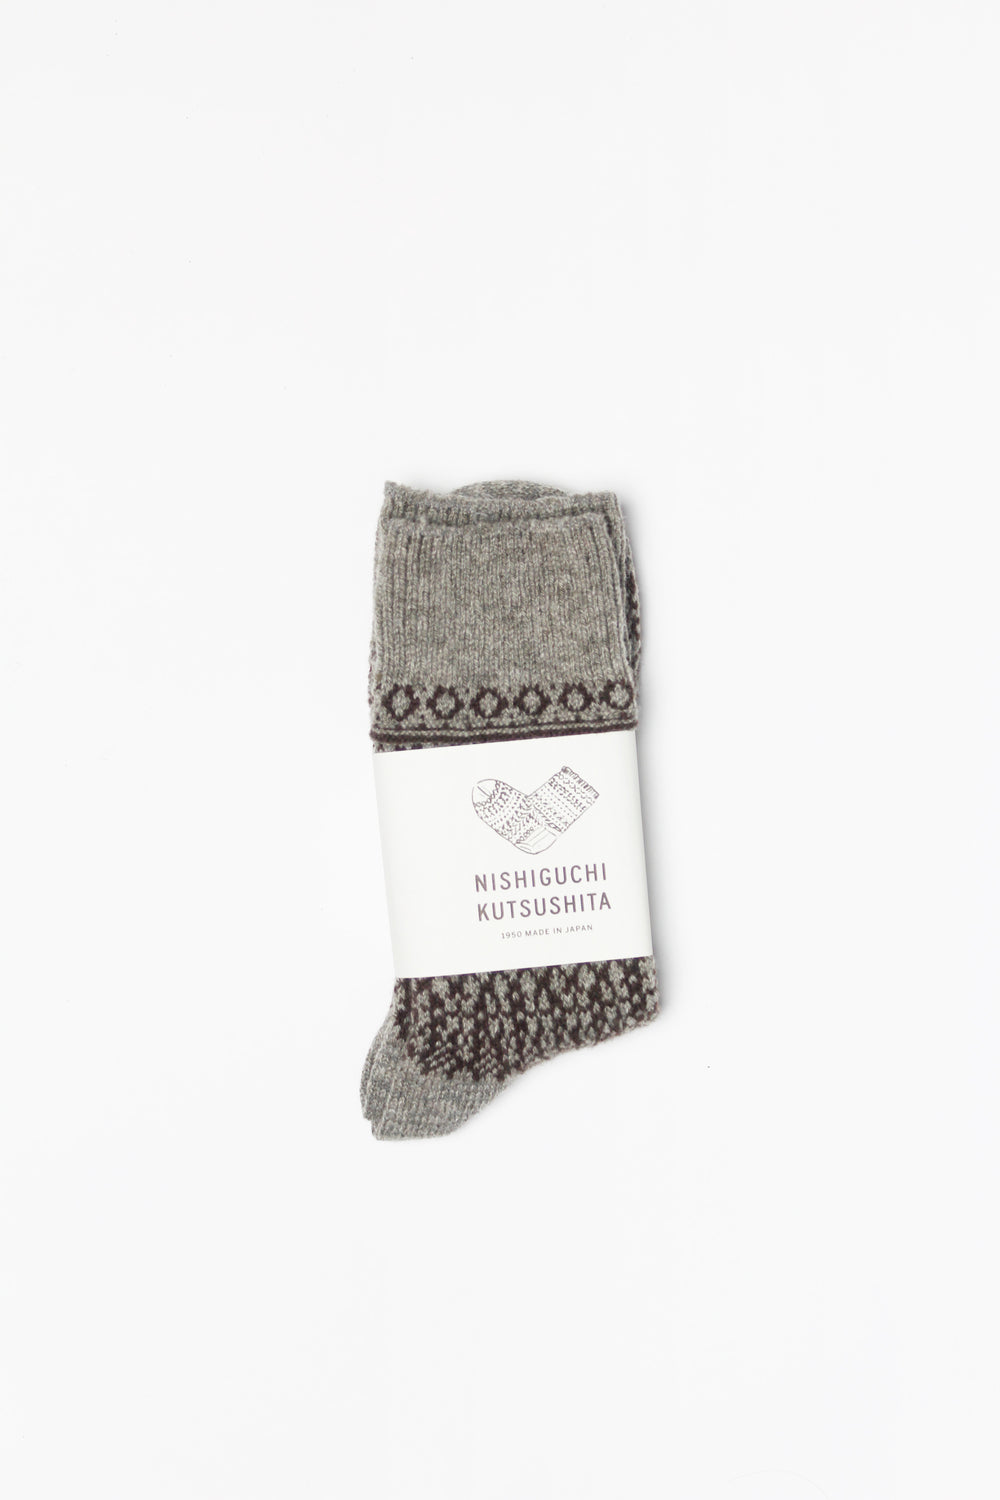 Wool Jacquard Socks, Grey with Brown ( Size M + L Only )